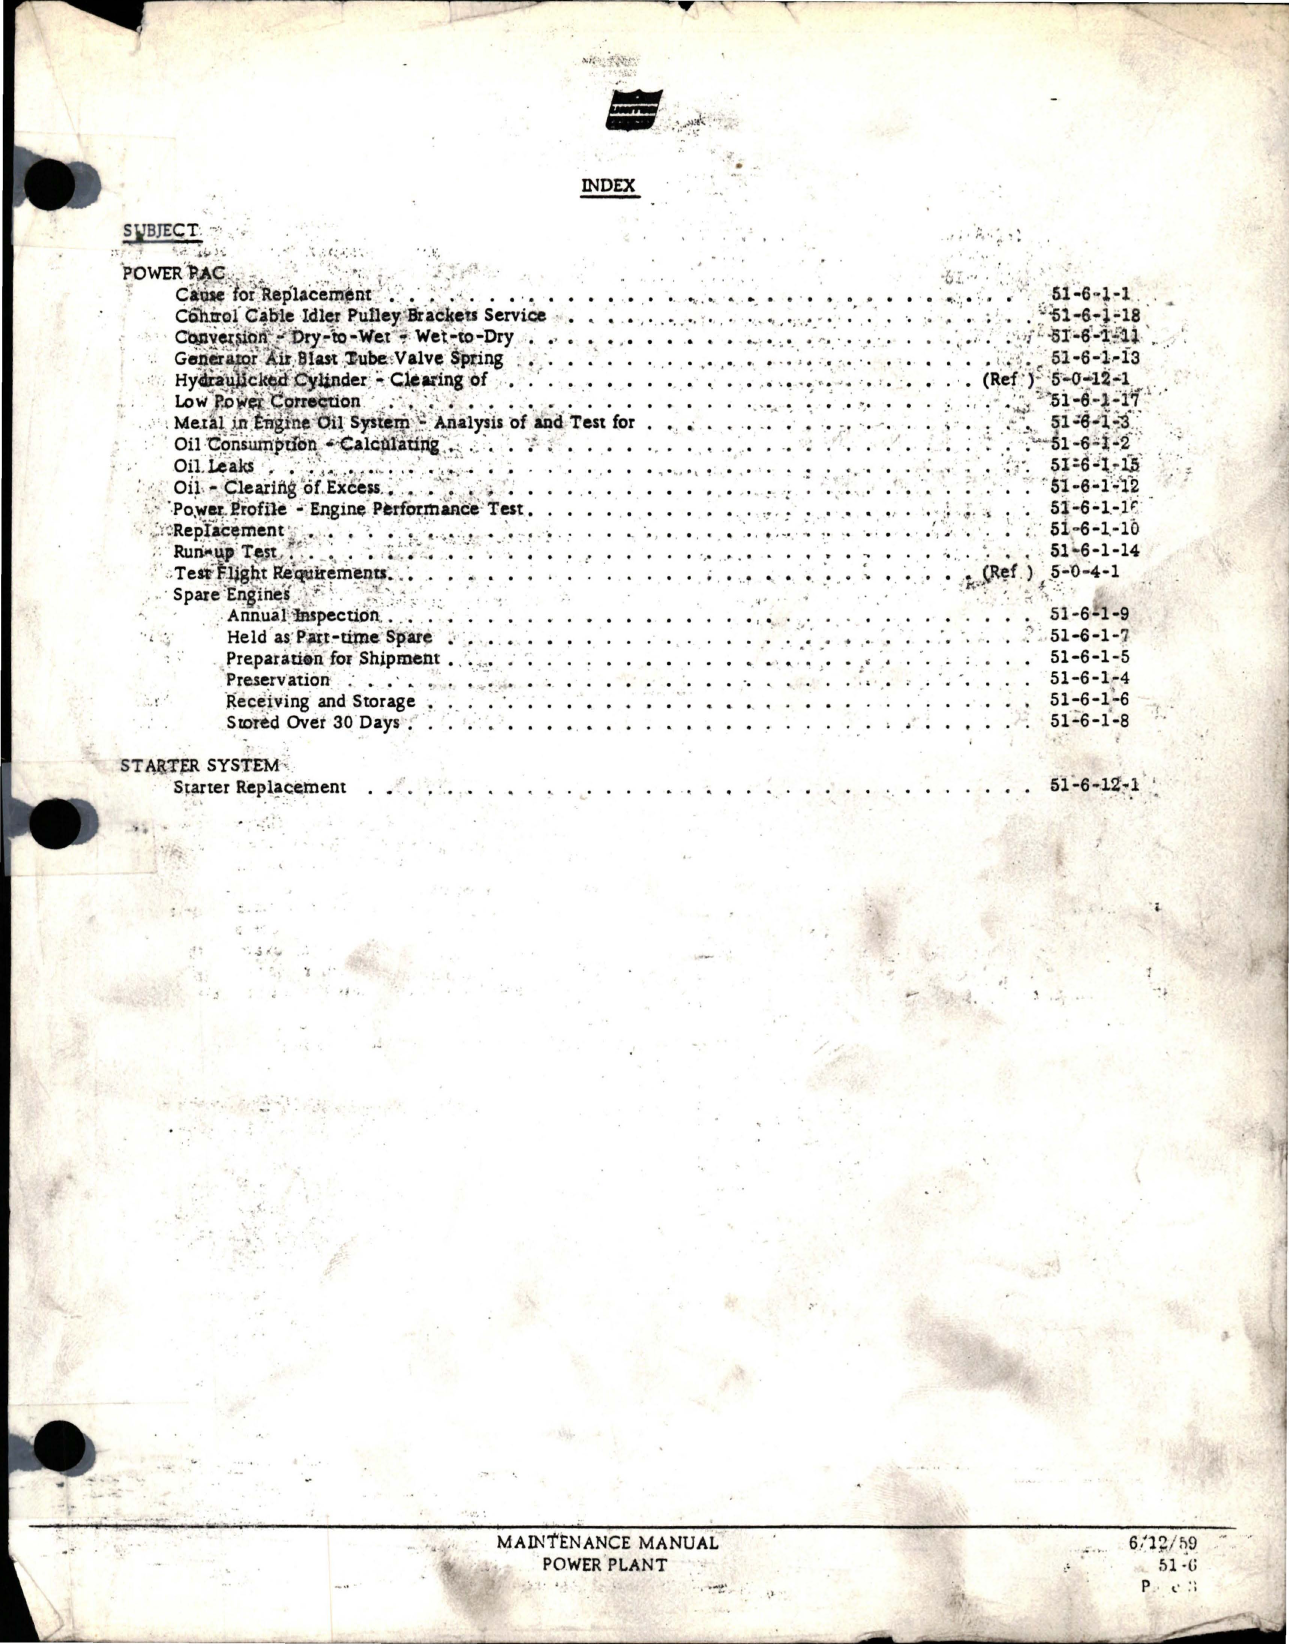 Sample page 1 from AirCorps Library document: Maintenance Manual for Power Plant - DC-6, DC-6A, DC-6B, CV-340, DC-7